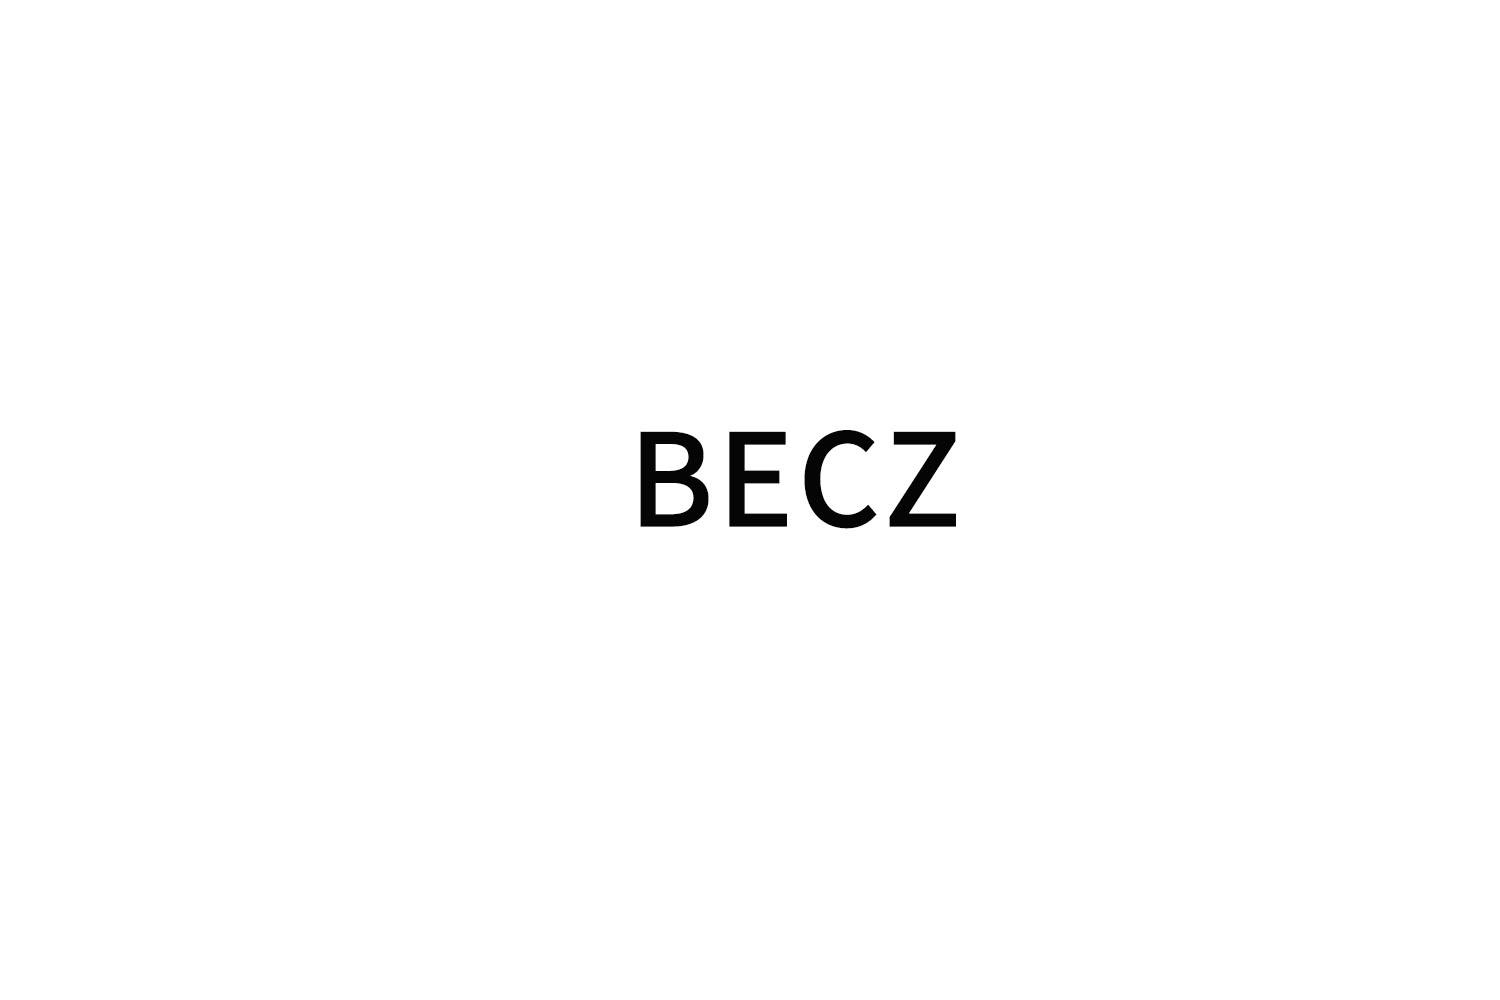 BECZ